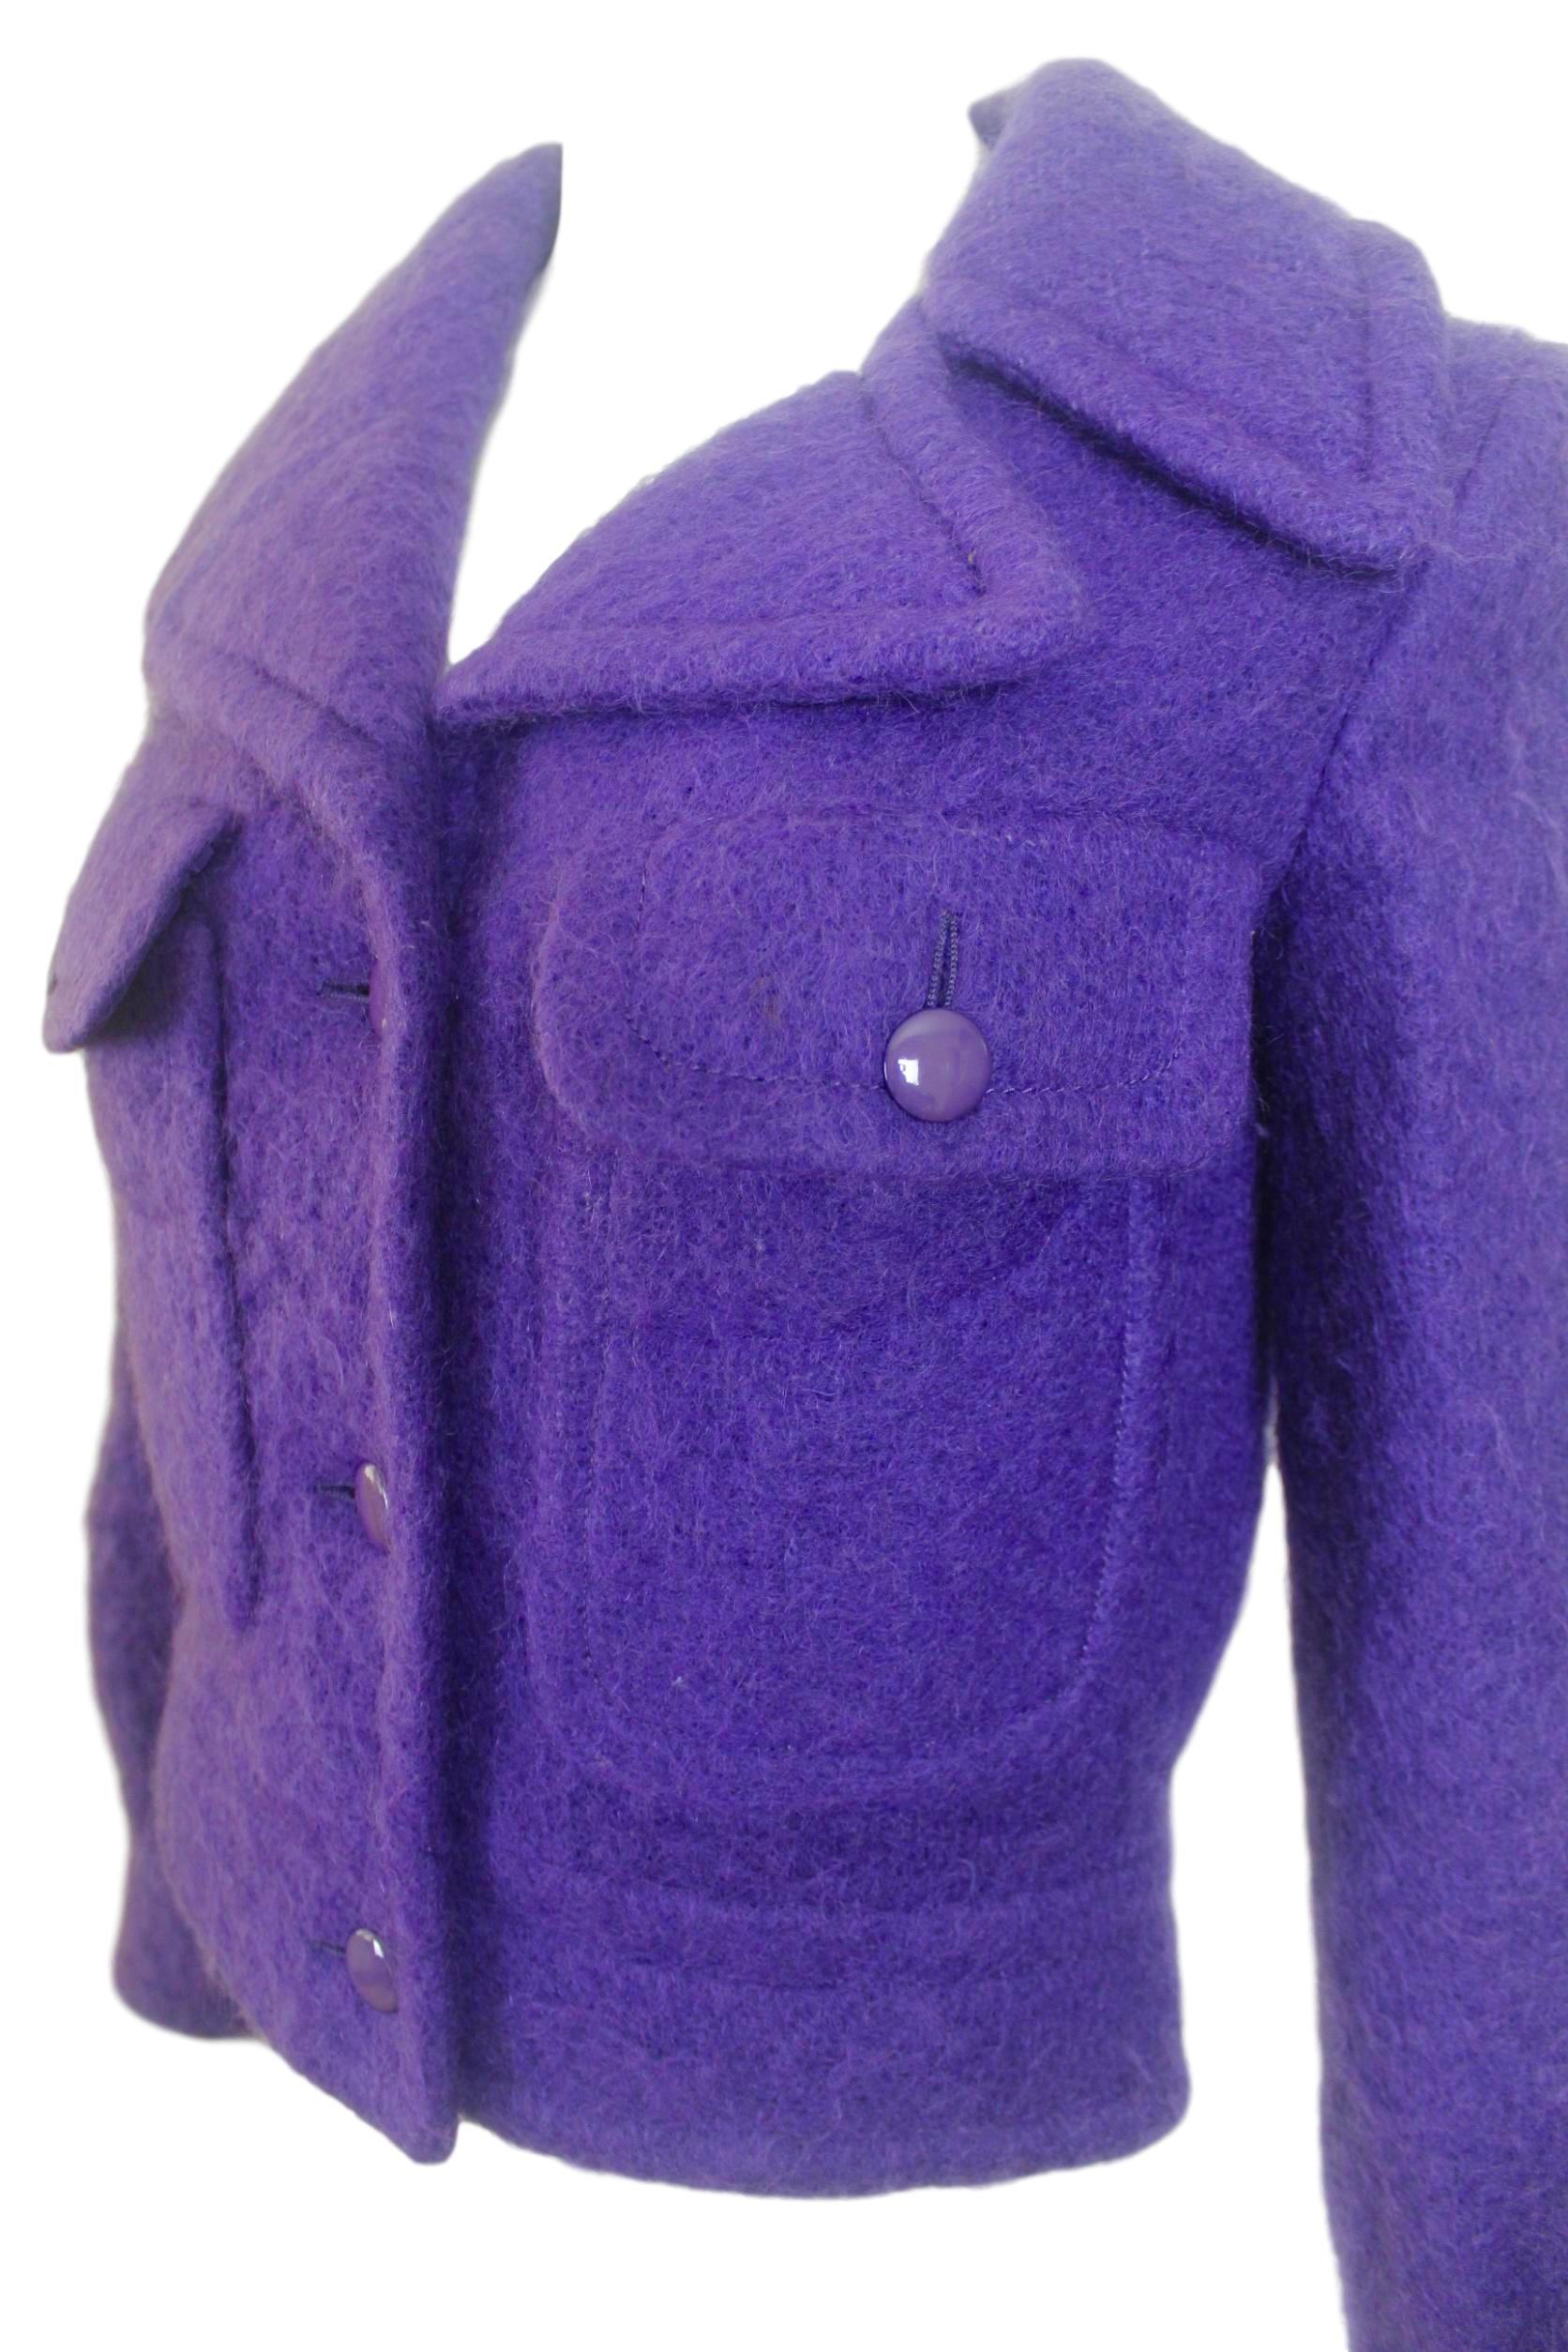 Pierre Cardin 1960s Mohair Jacket In Good Condition For Sale In Bath, GB